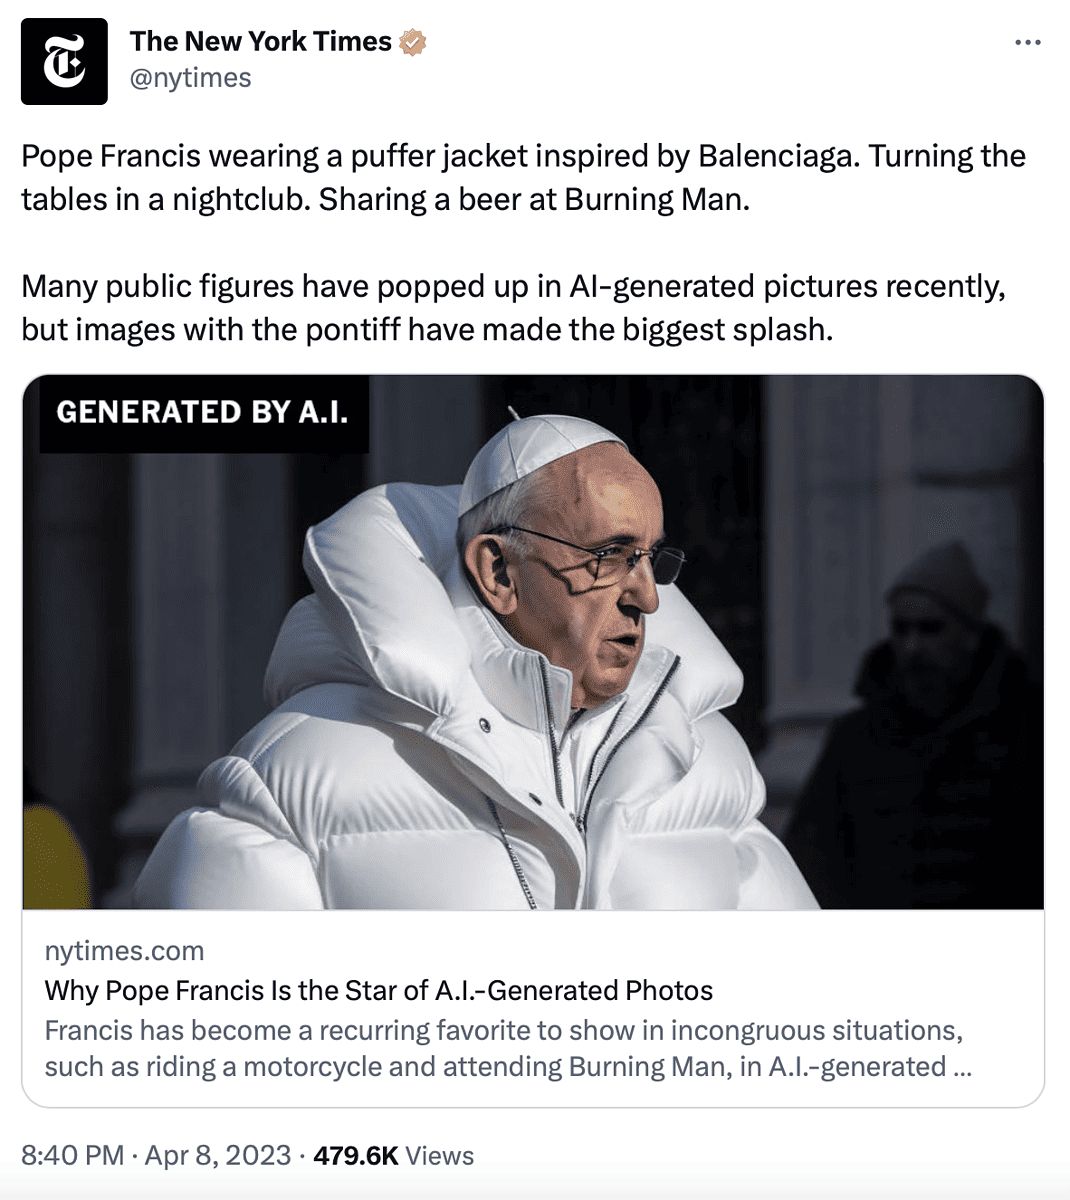 deepfake of the pope in a puffer jacket